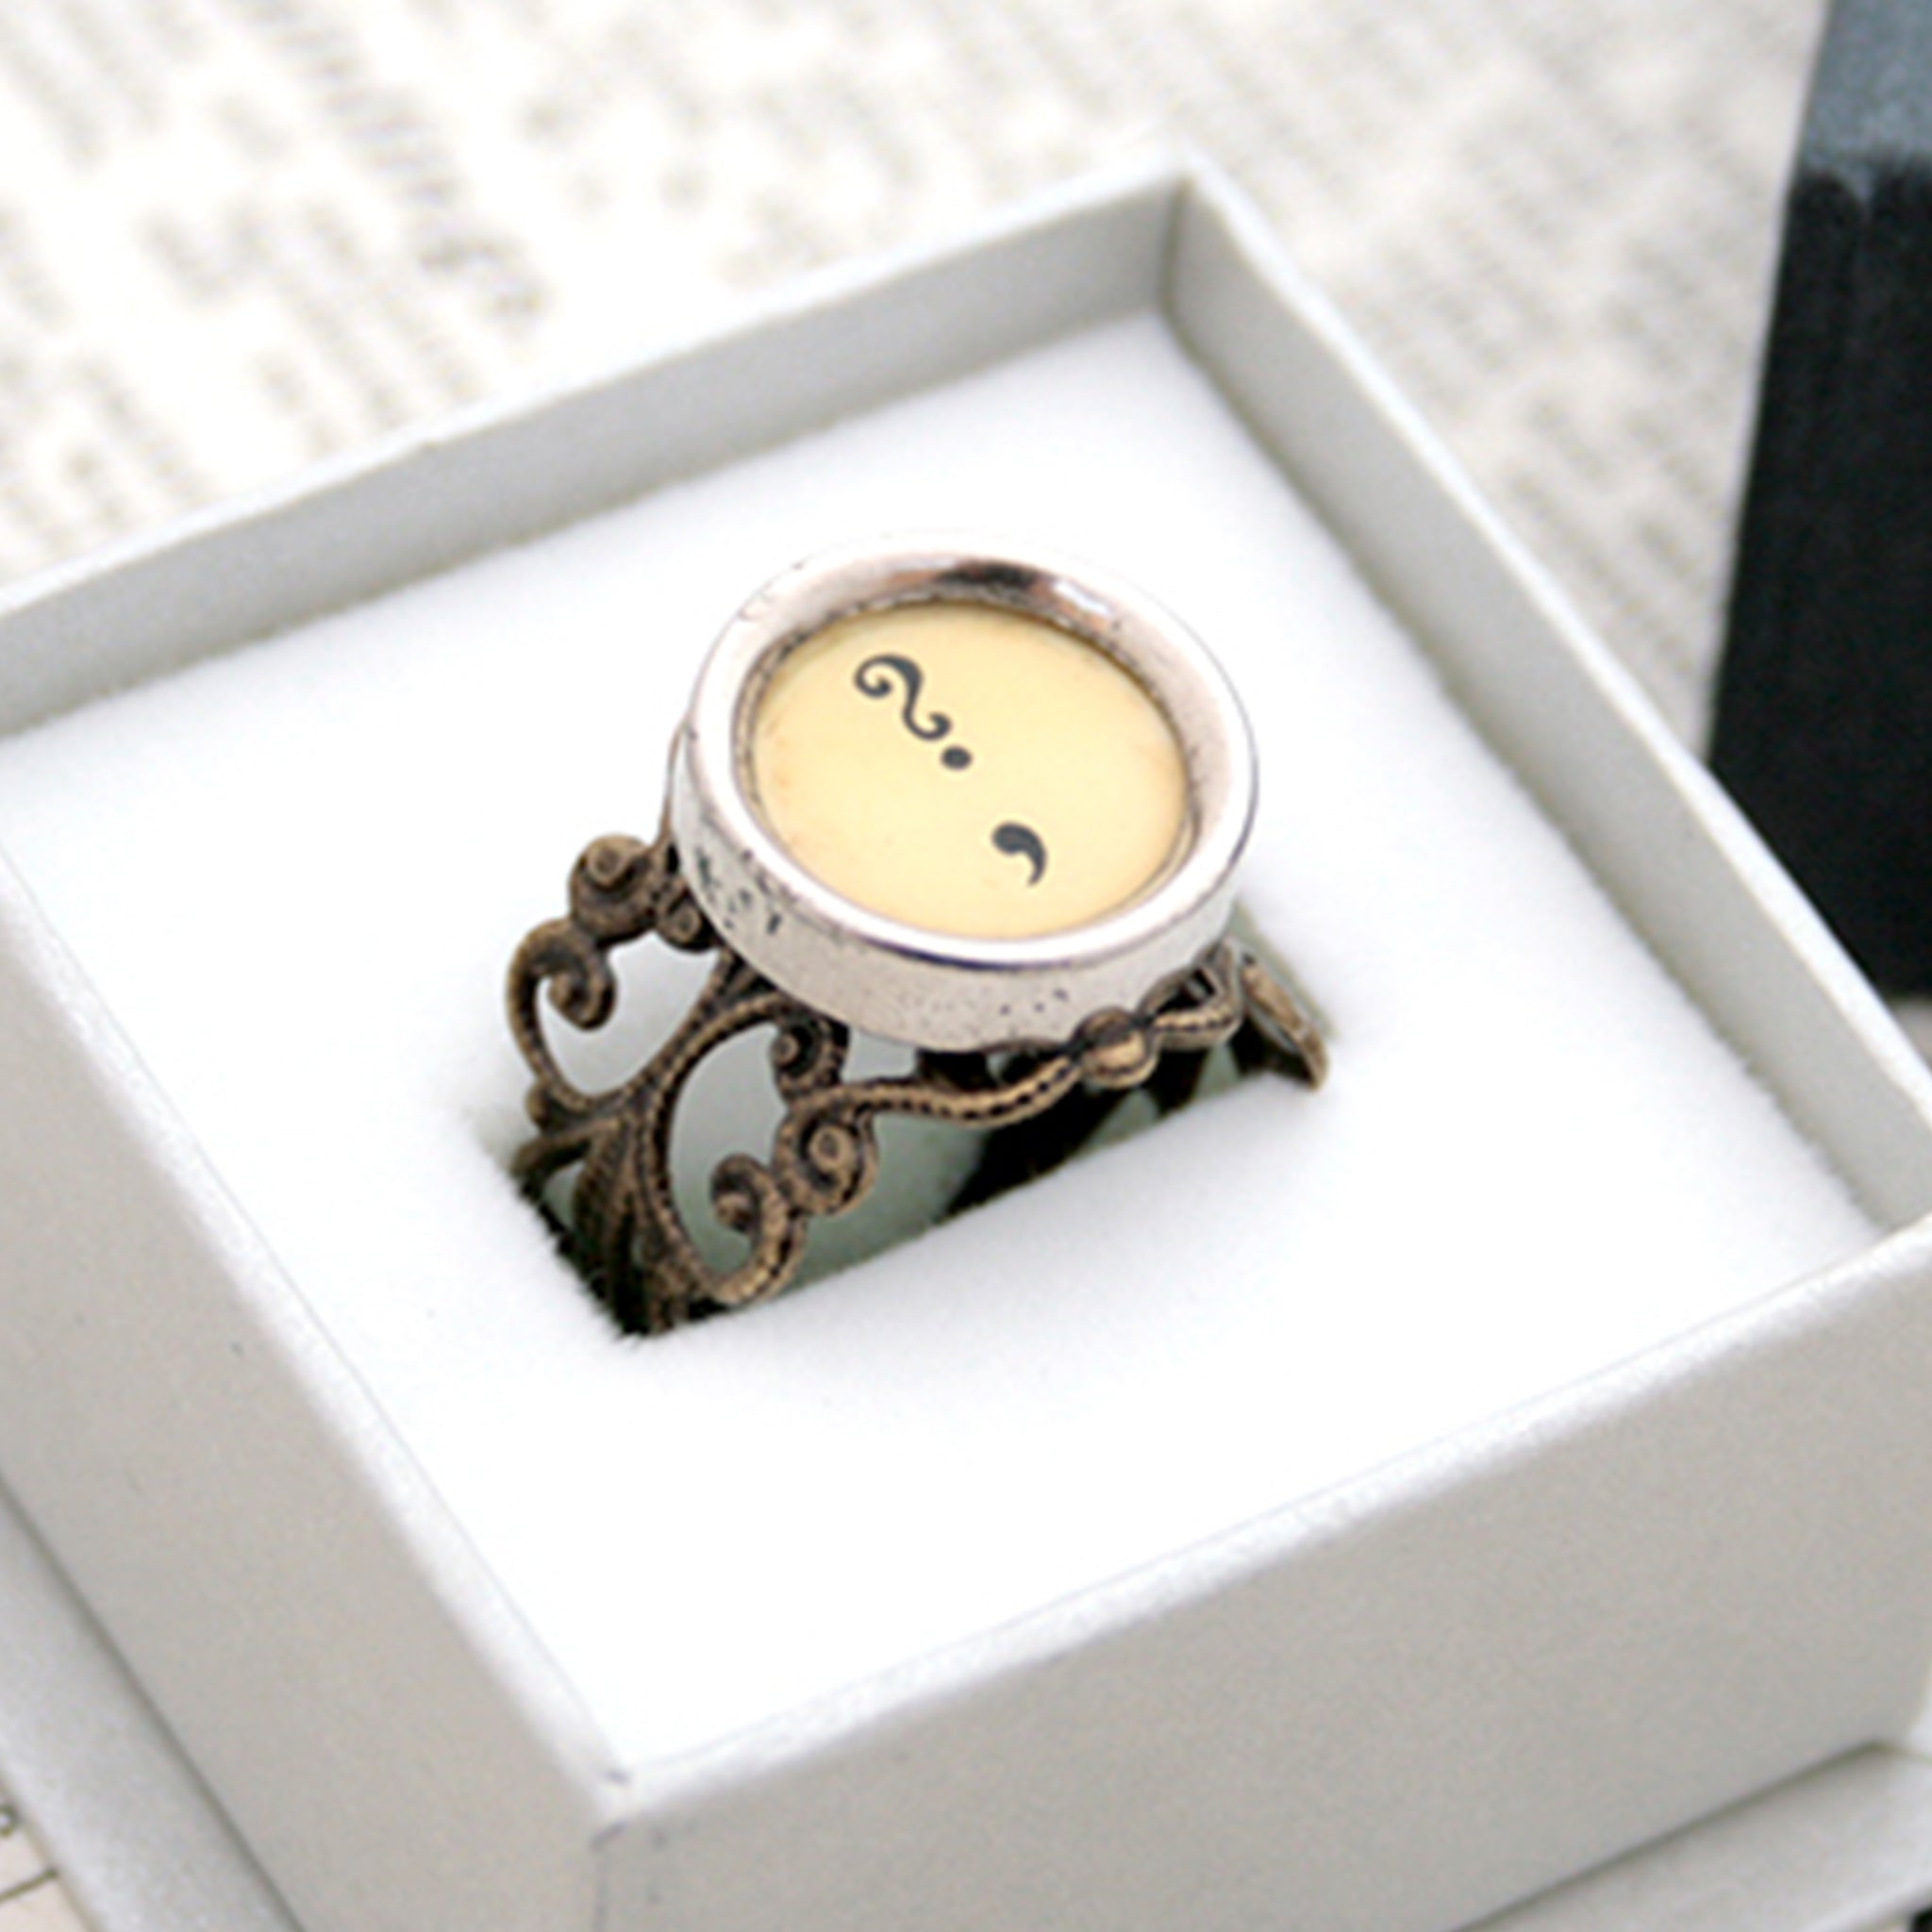 Ring with question mark and comma made of  typewriter key in ivory color in a box